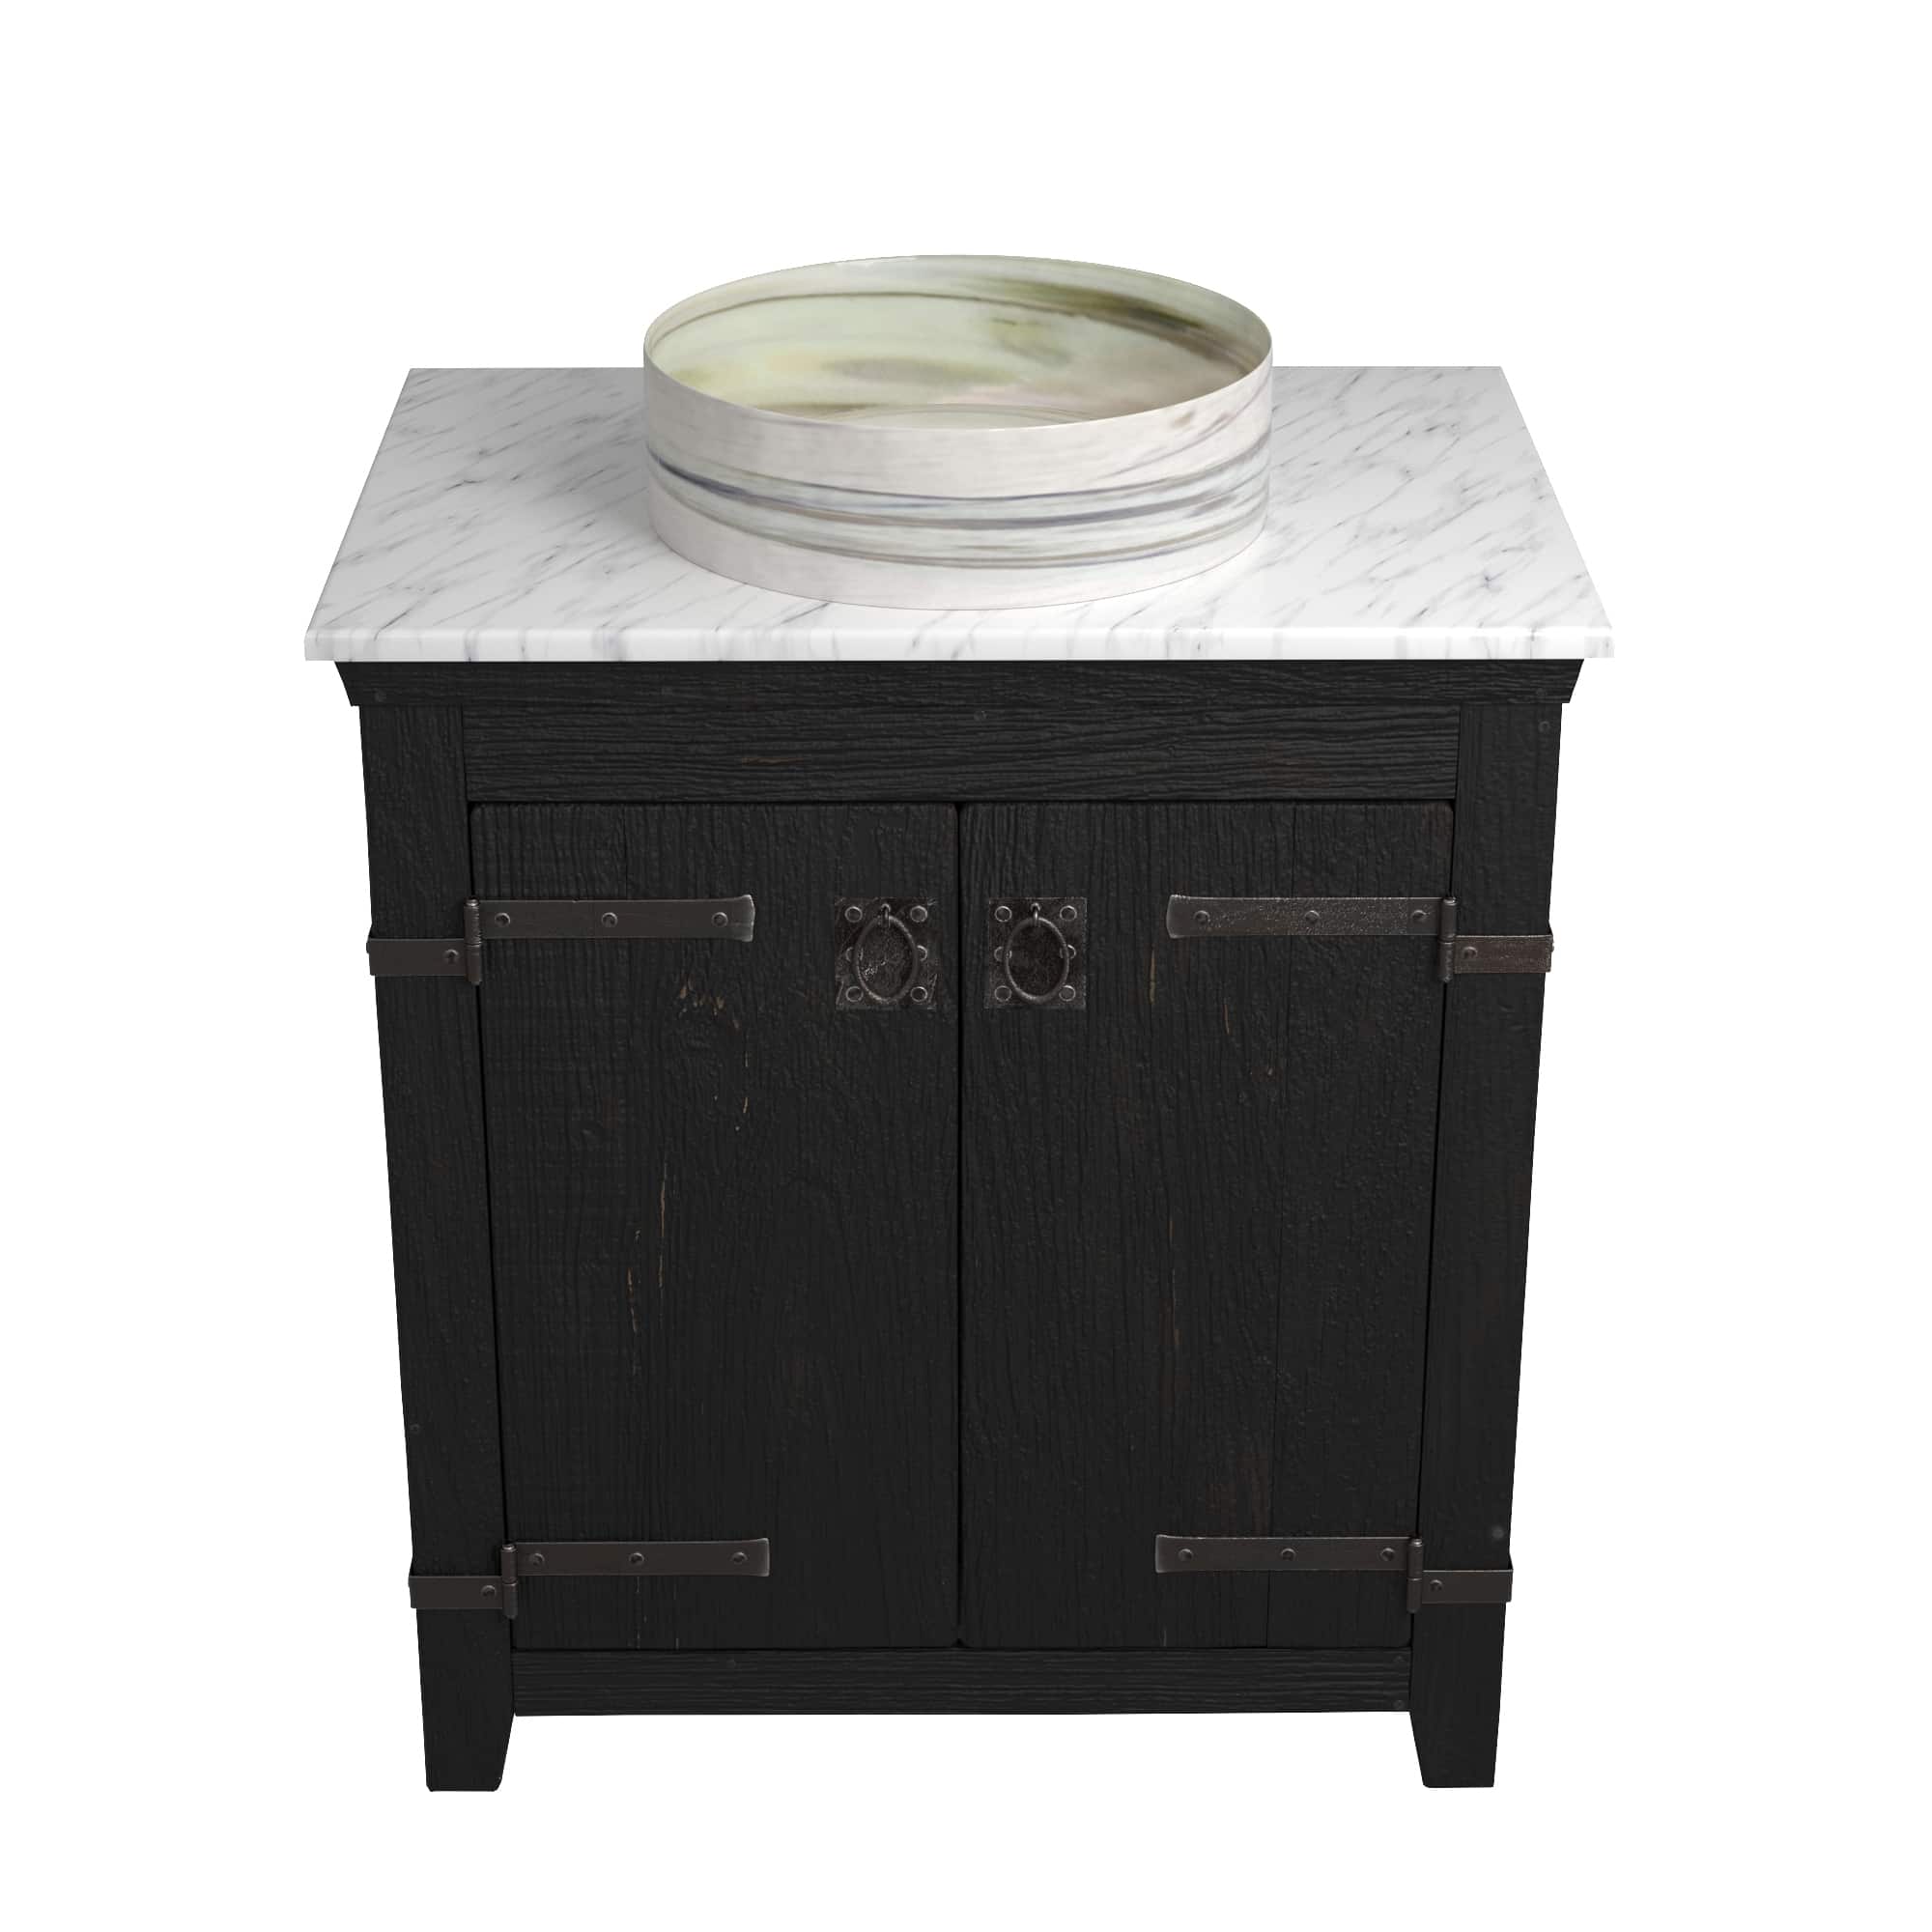 Native Trails 30" Americana Vanity in Anvil with Carrara Marble Top and Positano in Abalone, No Faucet Hole, BND30-VB-CT-MG-038